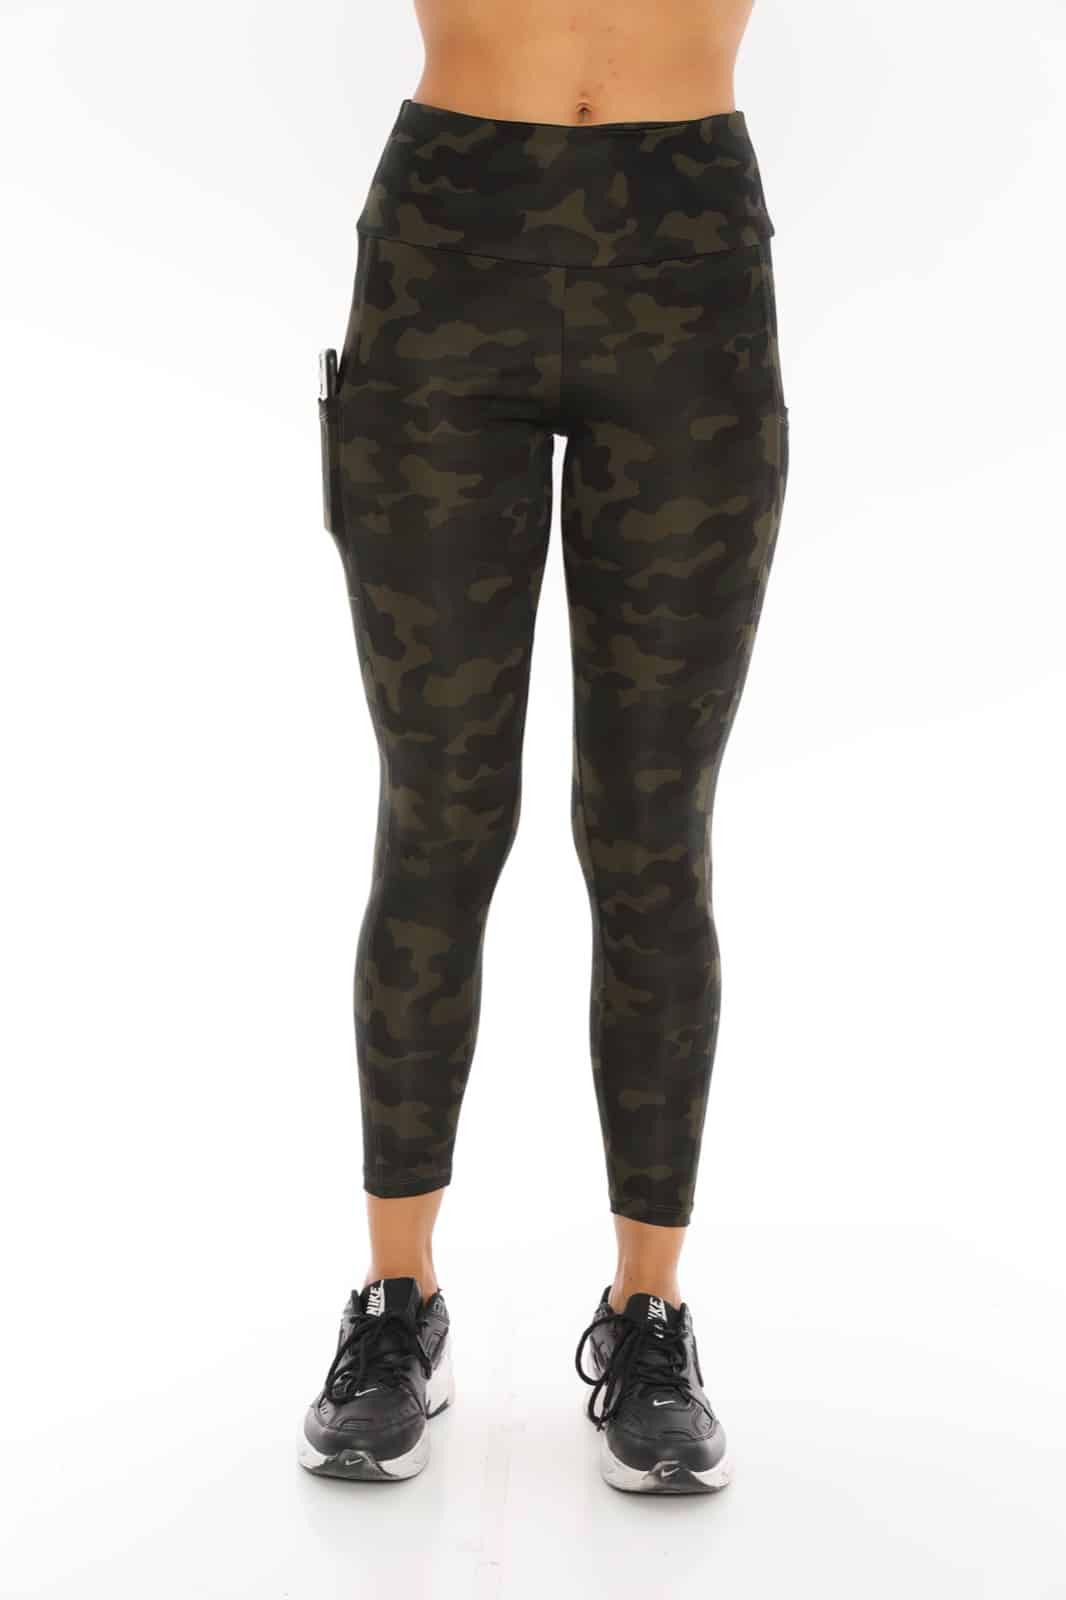 Leggings With Pockets - Green/Camo – Better Tights